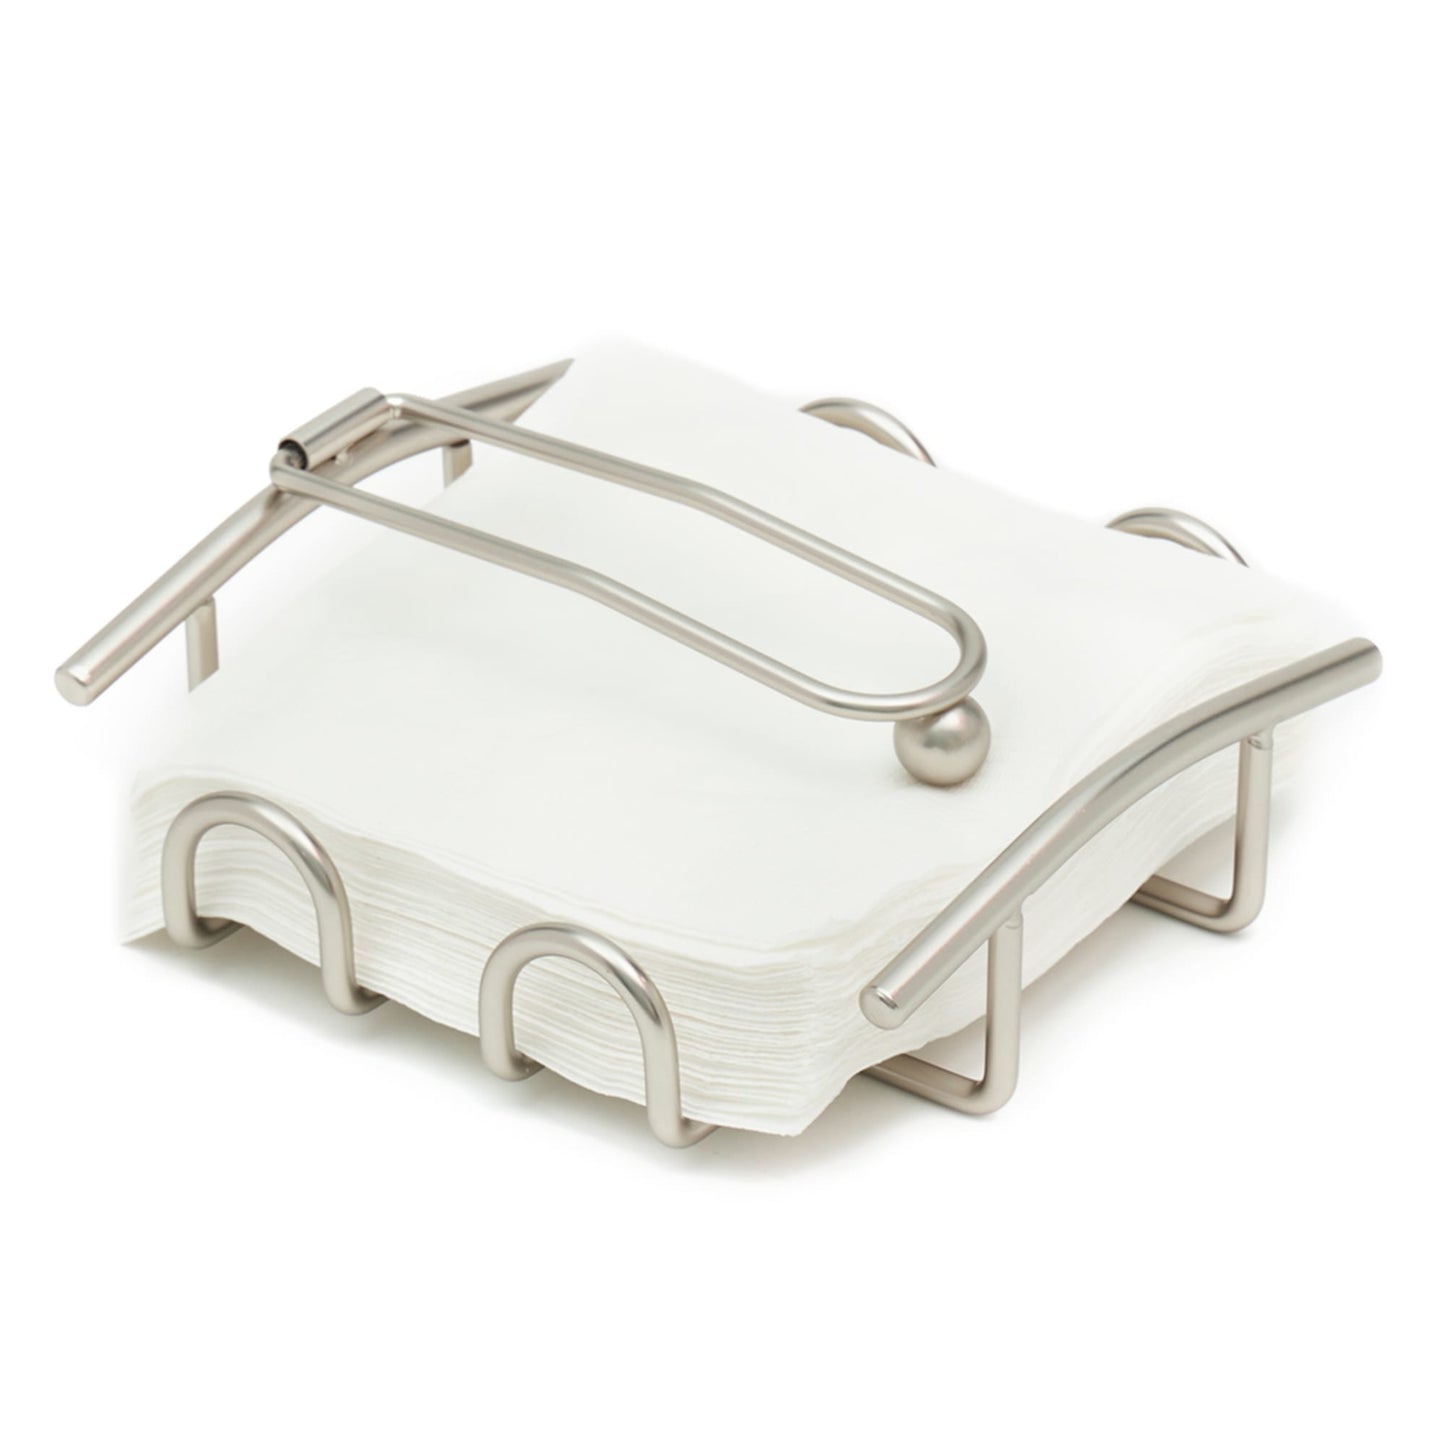 Michael Graves Design Simplicity Flat Steel Napkin Holder with Weighted Pivoting Arm, Satin Nickel